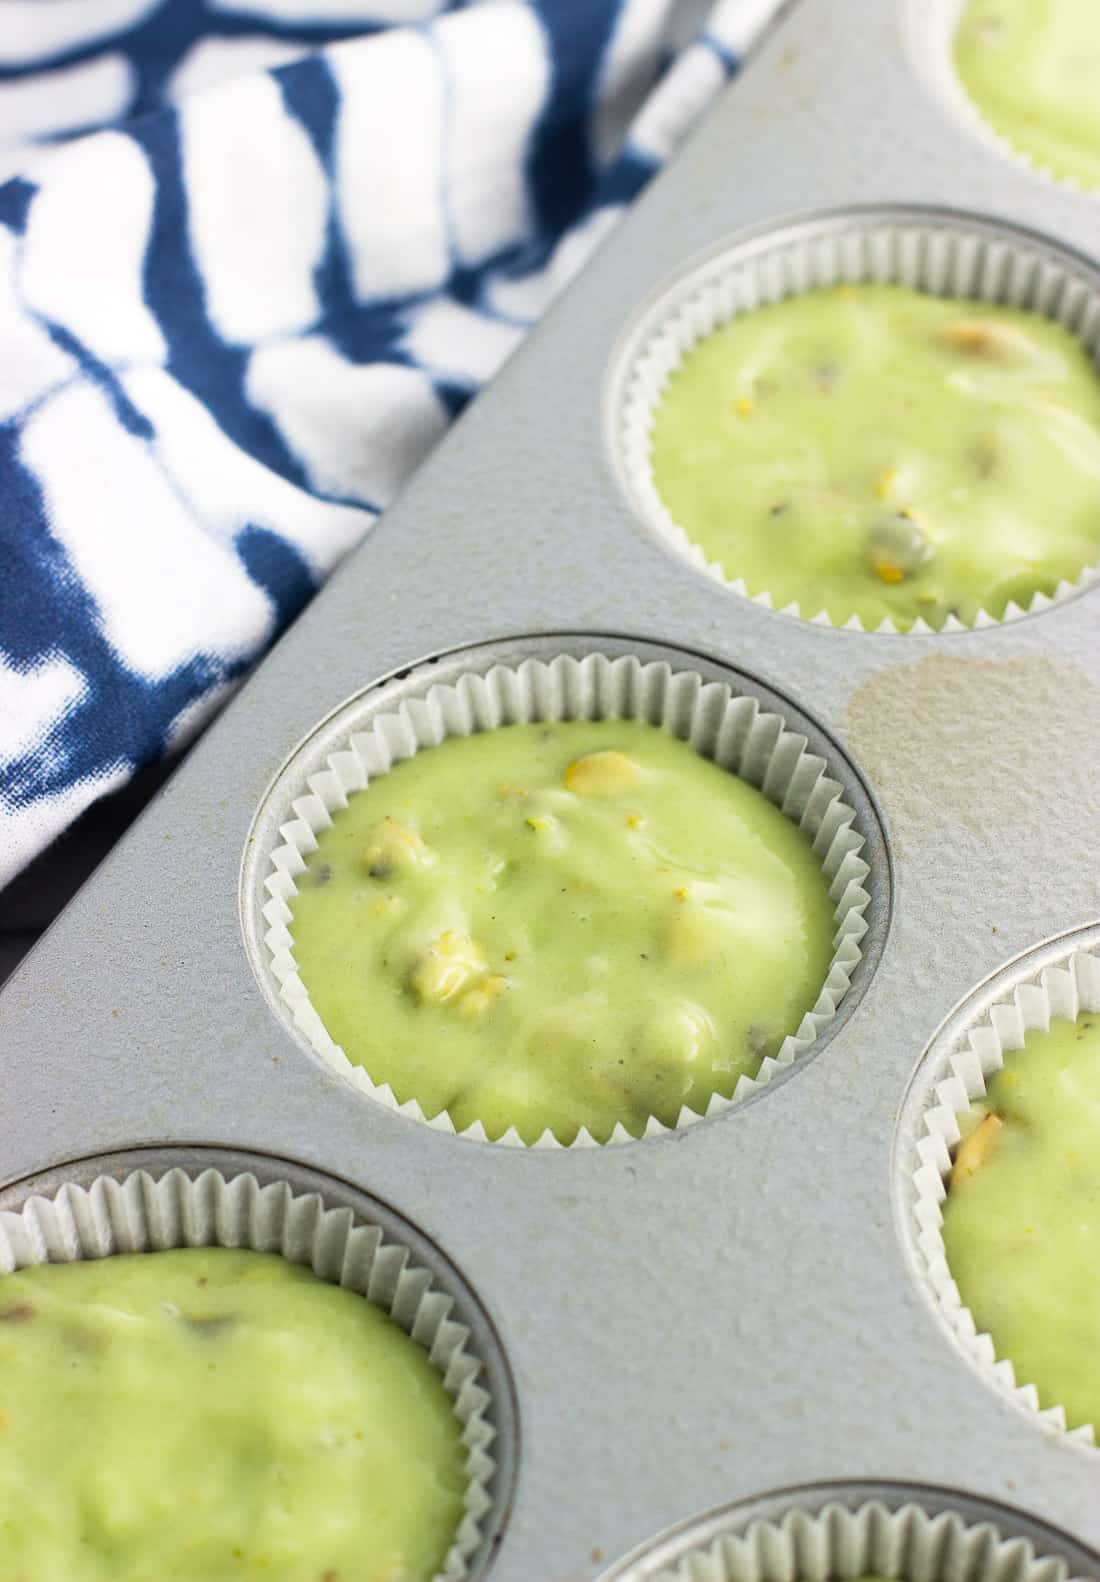 Pistachio muffin batter in muffin papers in a metal muffin tin